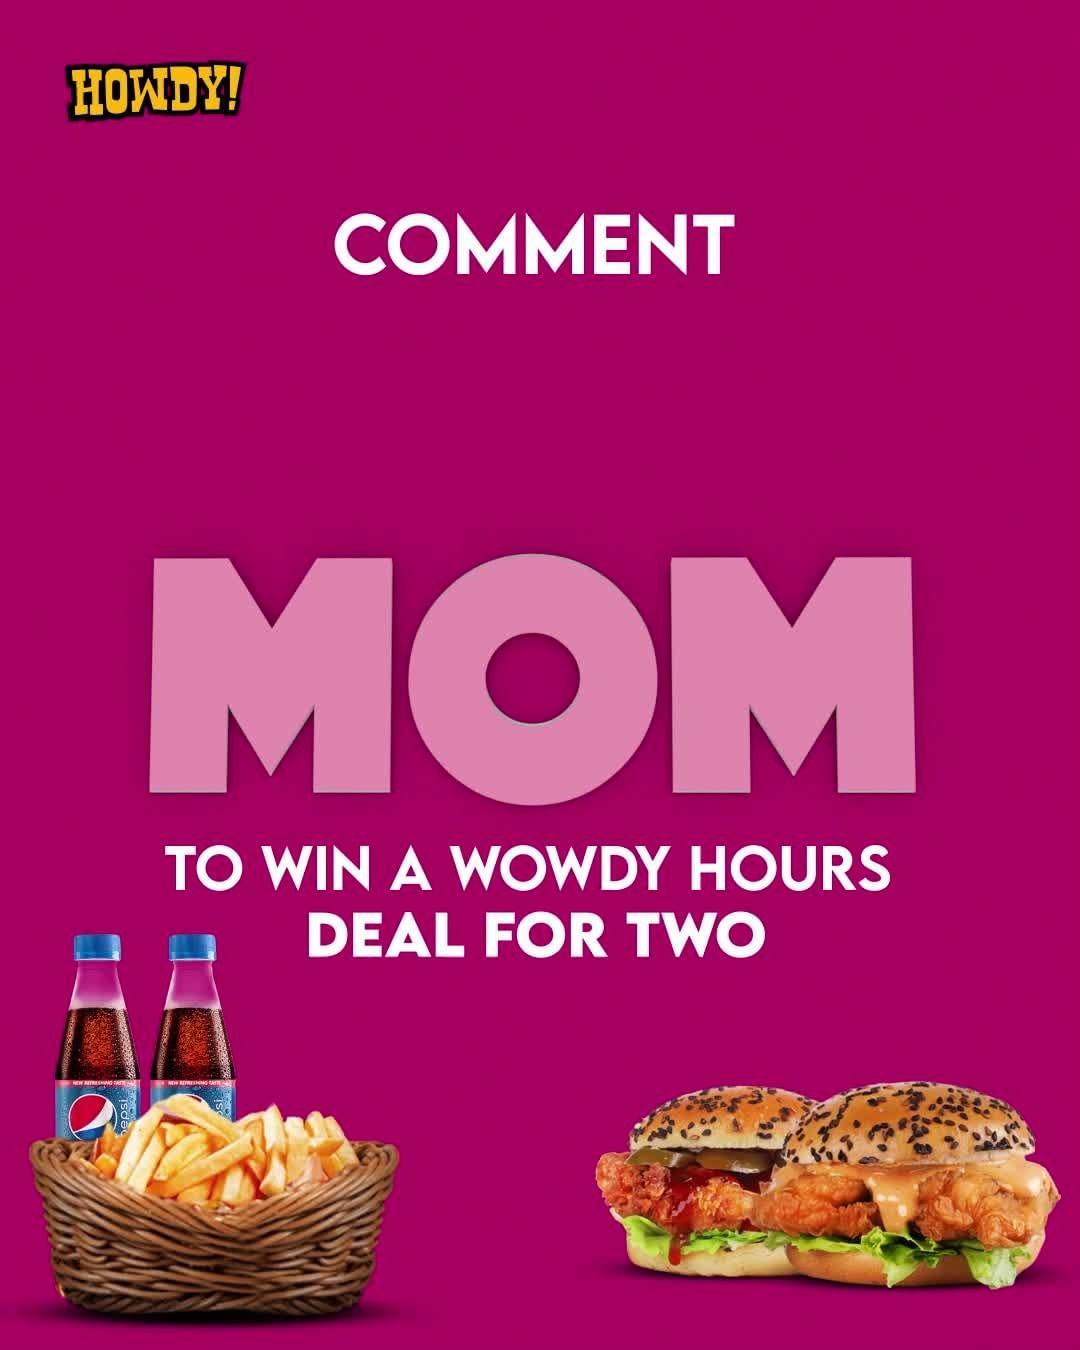 class="content__text"
 Happy Mother's Day! Comment WOW MOM &amp; win a FREE Wowdy Hours Deal for 2 pardners!

 #Howdy #howdypakistan #howdyislamabad #bestburgersintown #islamabadfood #lahorefoodies #Pakistan #Islamabad #Lahore #itshappyning #burgers #fries #foodlovers #foodstagram #delivery #DealsAndDiscounts #deals #HowdyApp #mothersday #happymothersday 
 